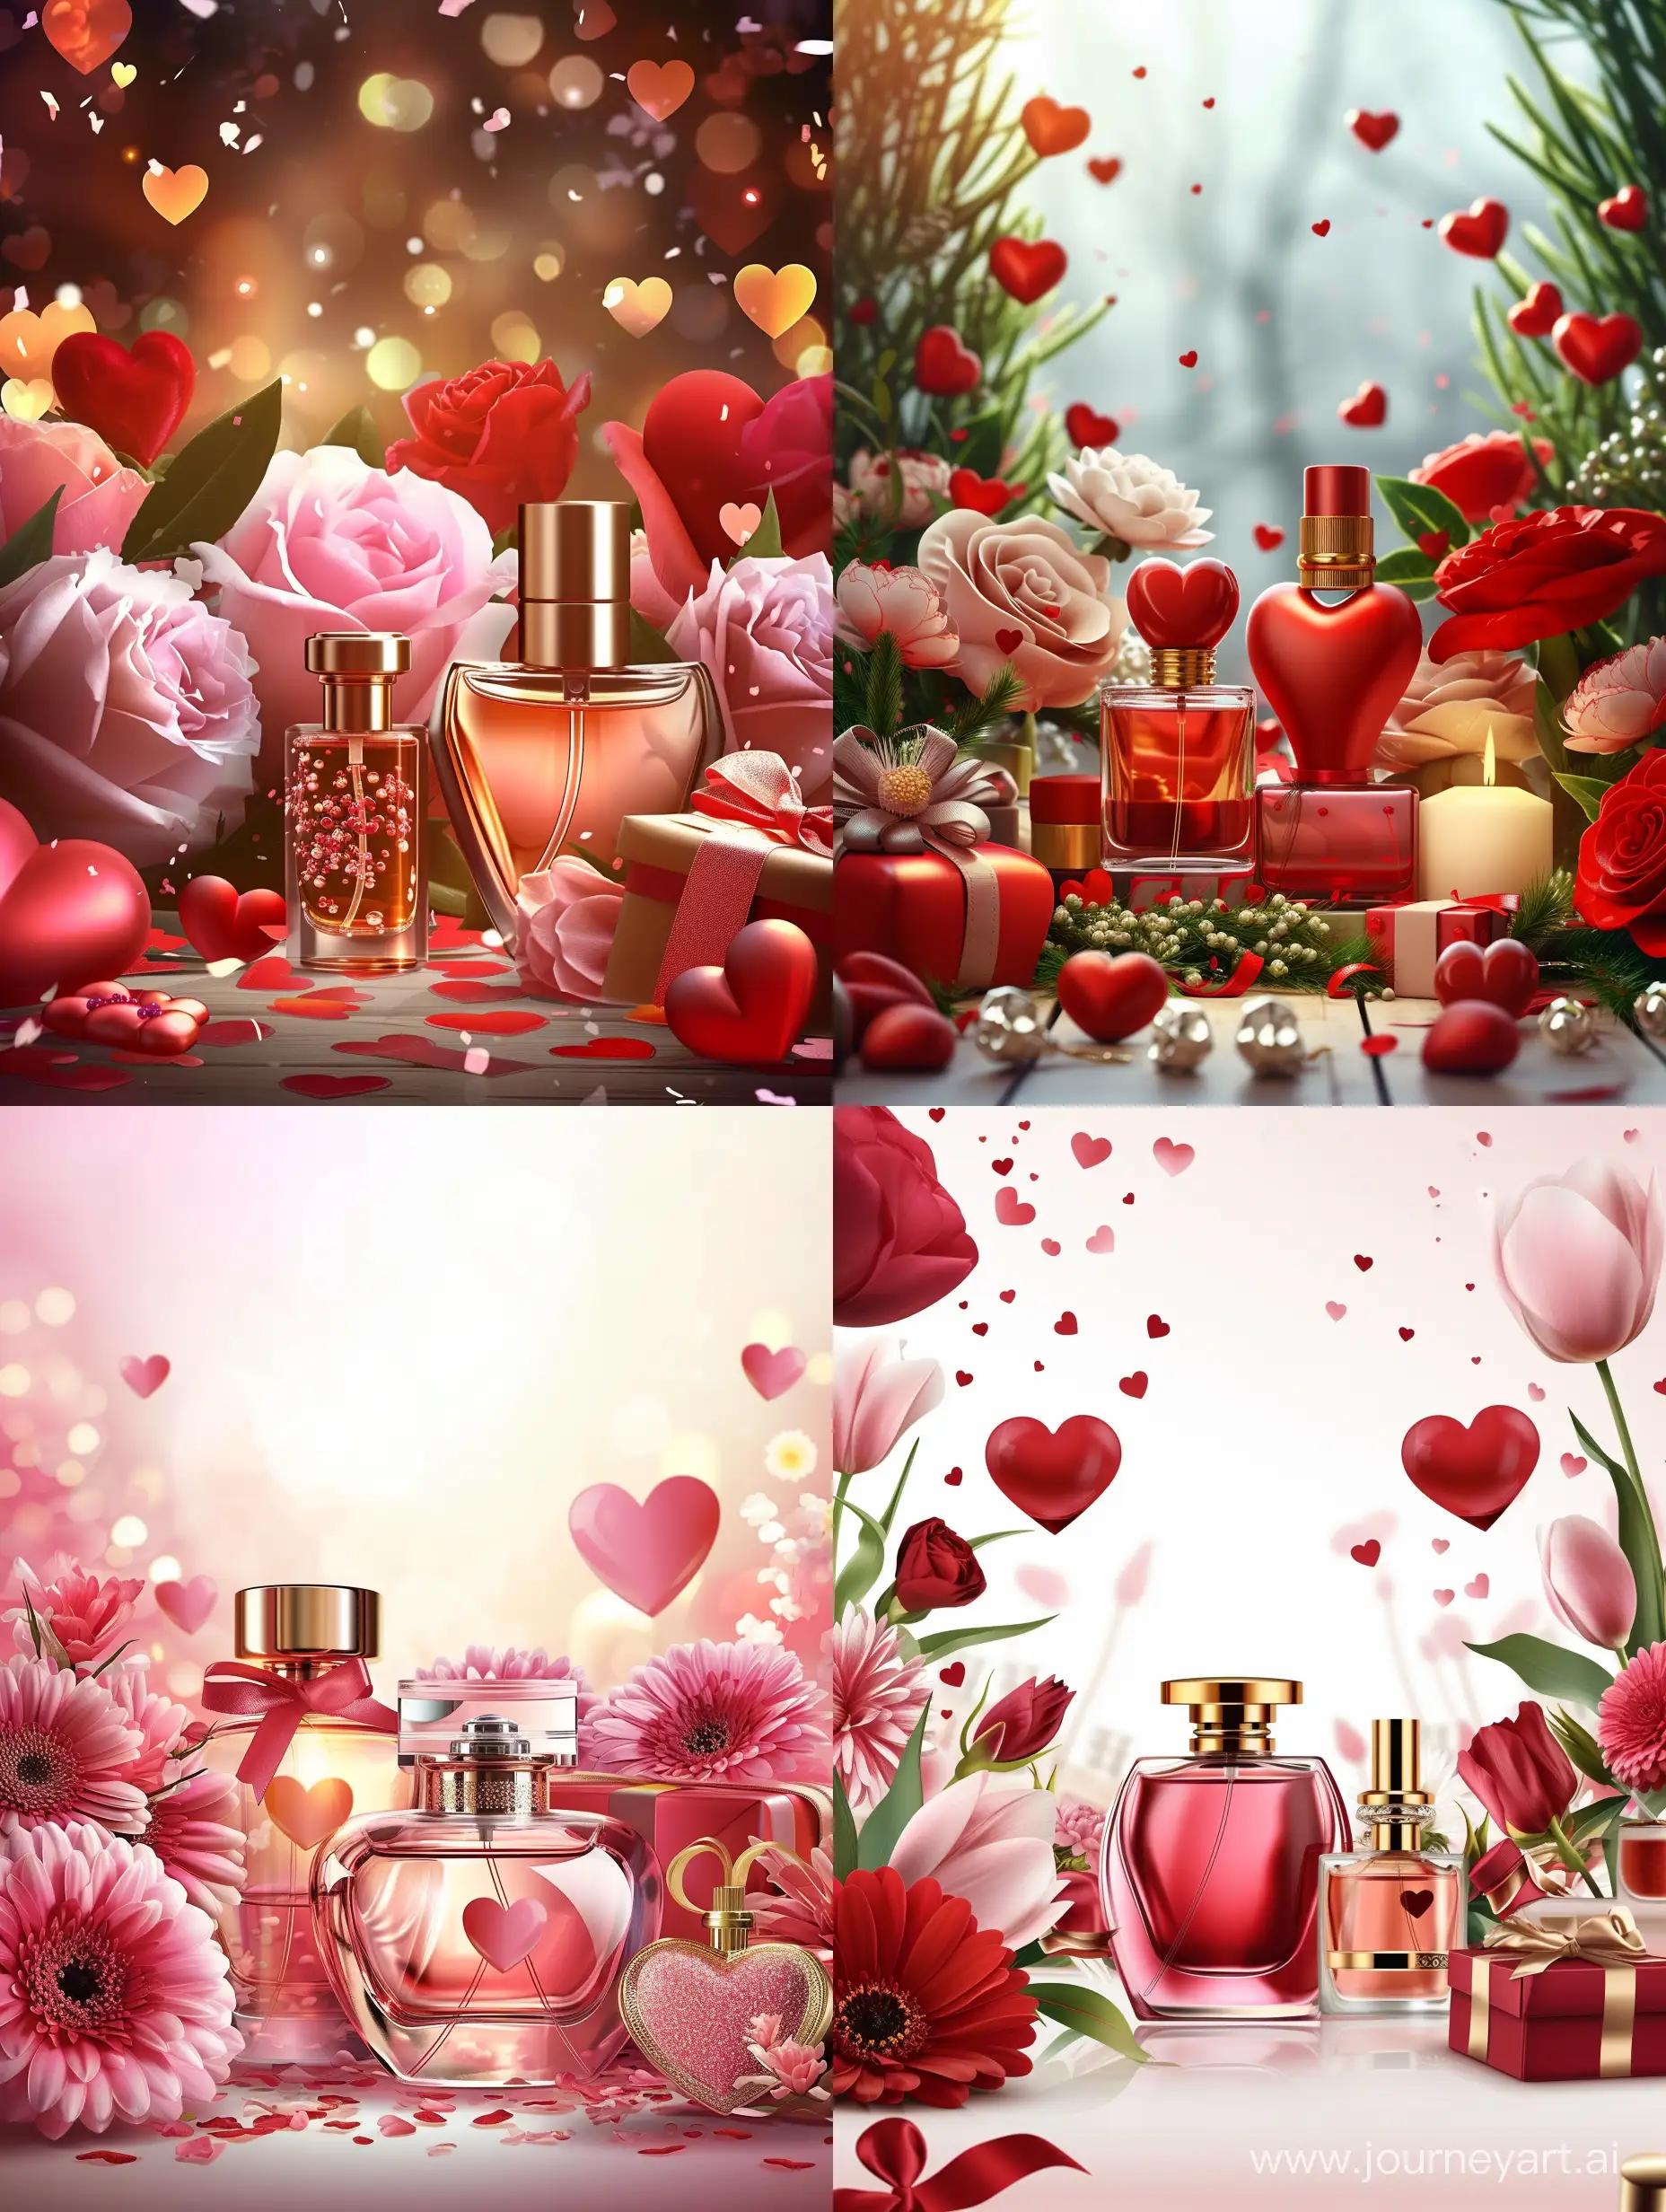 Romantic-Valentines-Day-Celebration-with-Flowers-Hearts-and-Perfume-Bottles